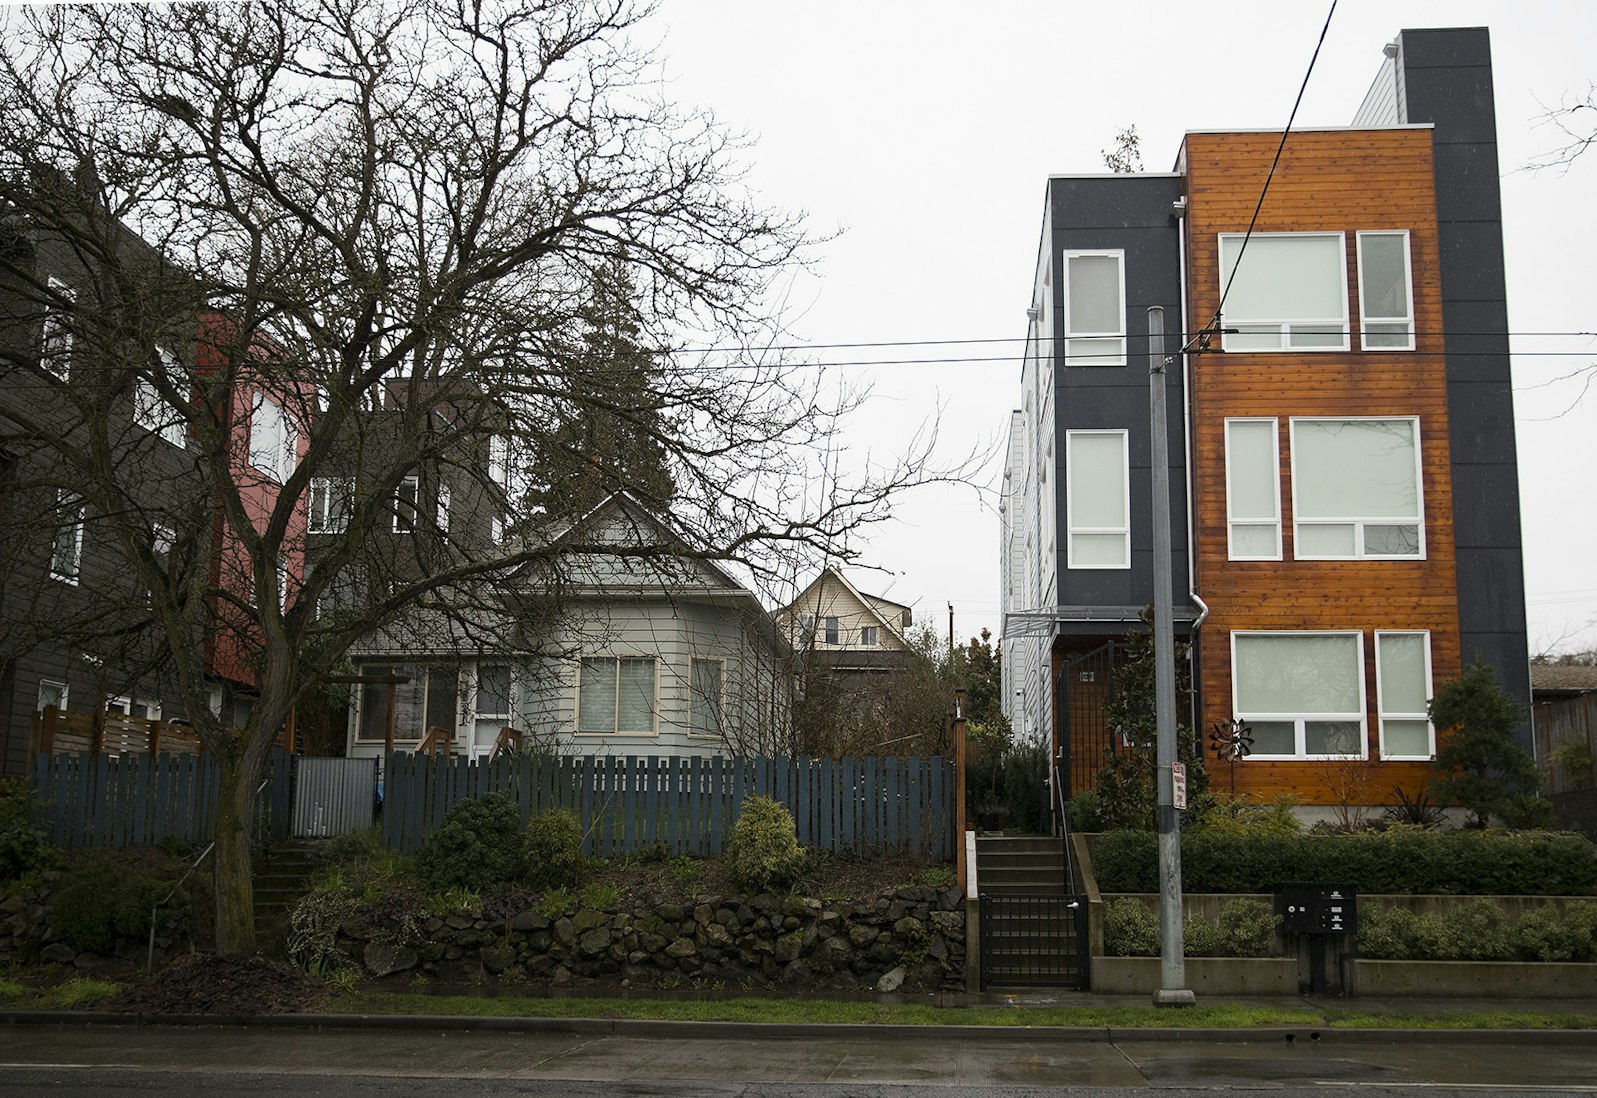 Homes near the intersection of 23rd Avenue East and East Thomas Street in Seattle.